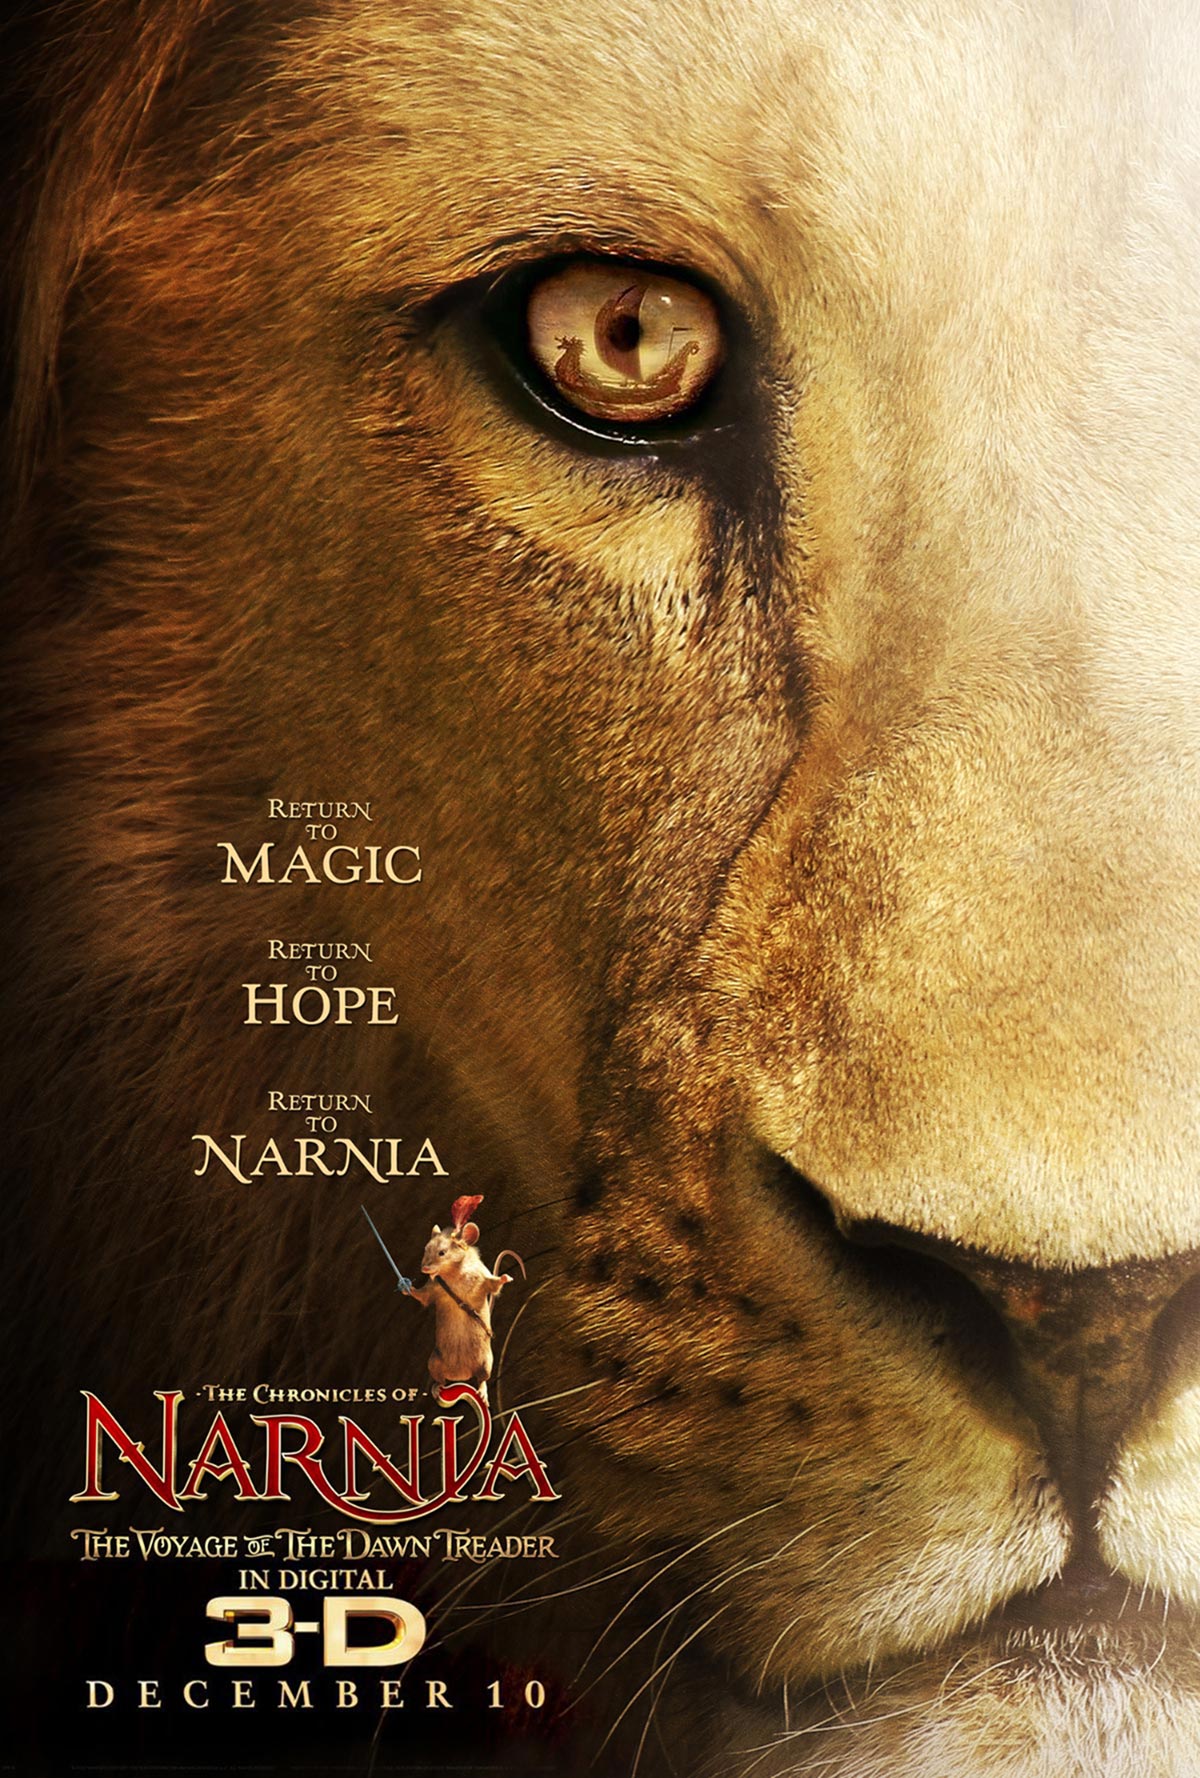 041_dreamogram-iconisus-key-art-movie-poster-the-chronicles-of-narnia-1_vertical-cover